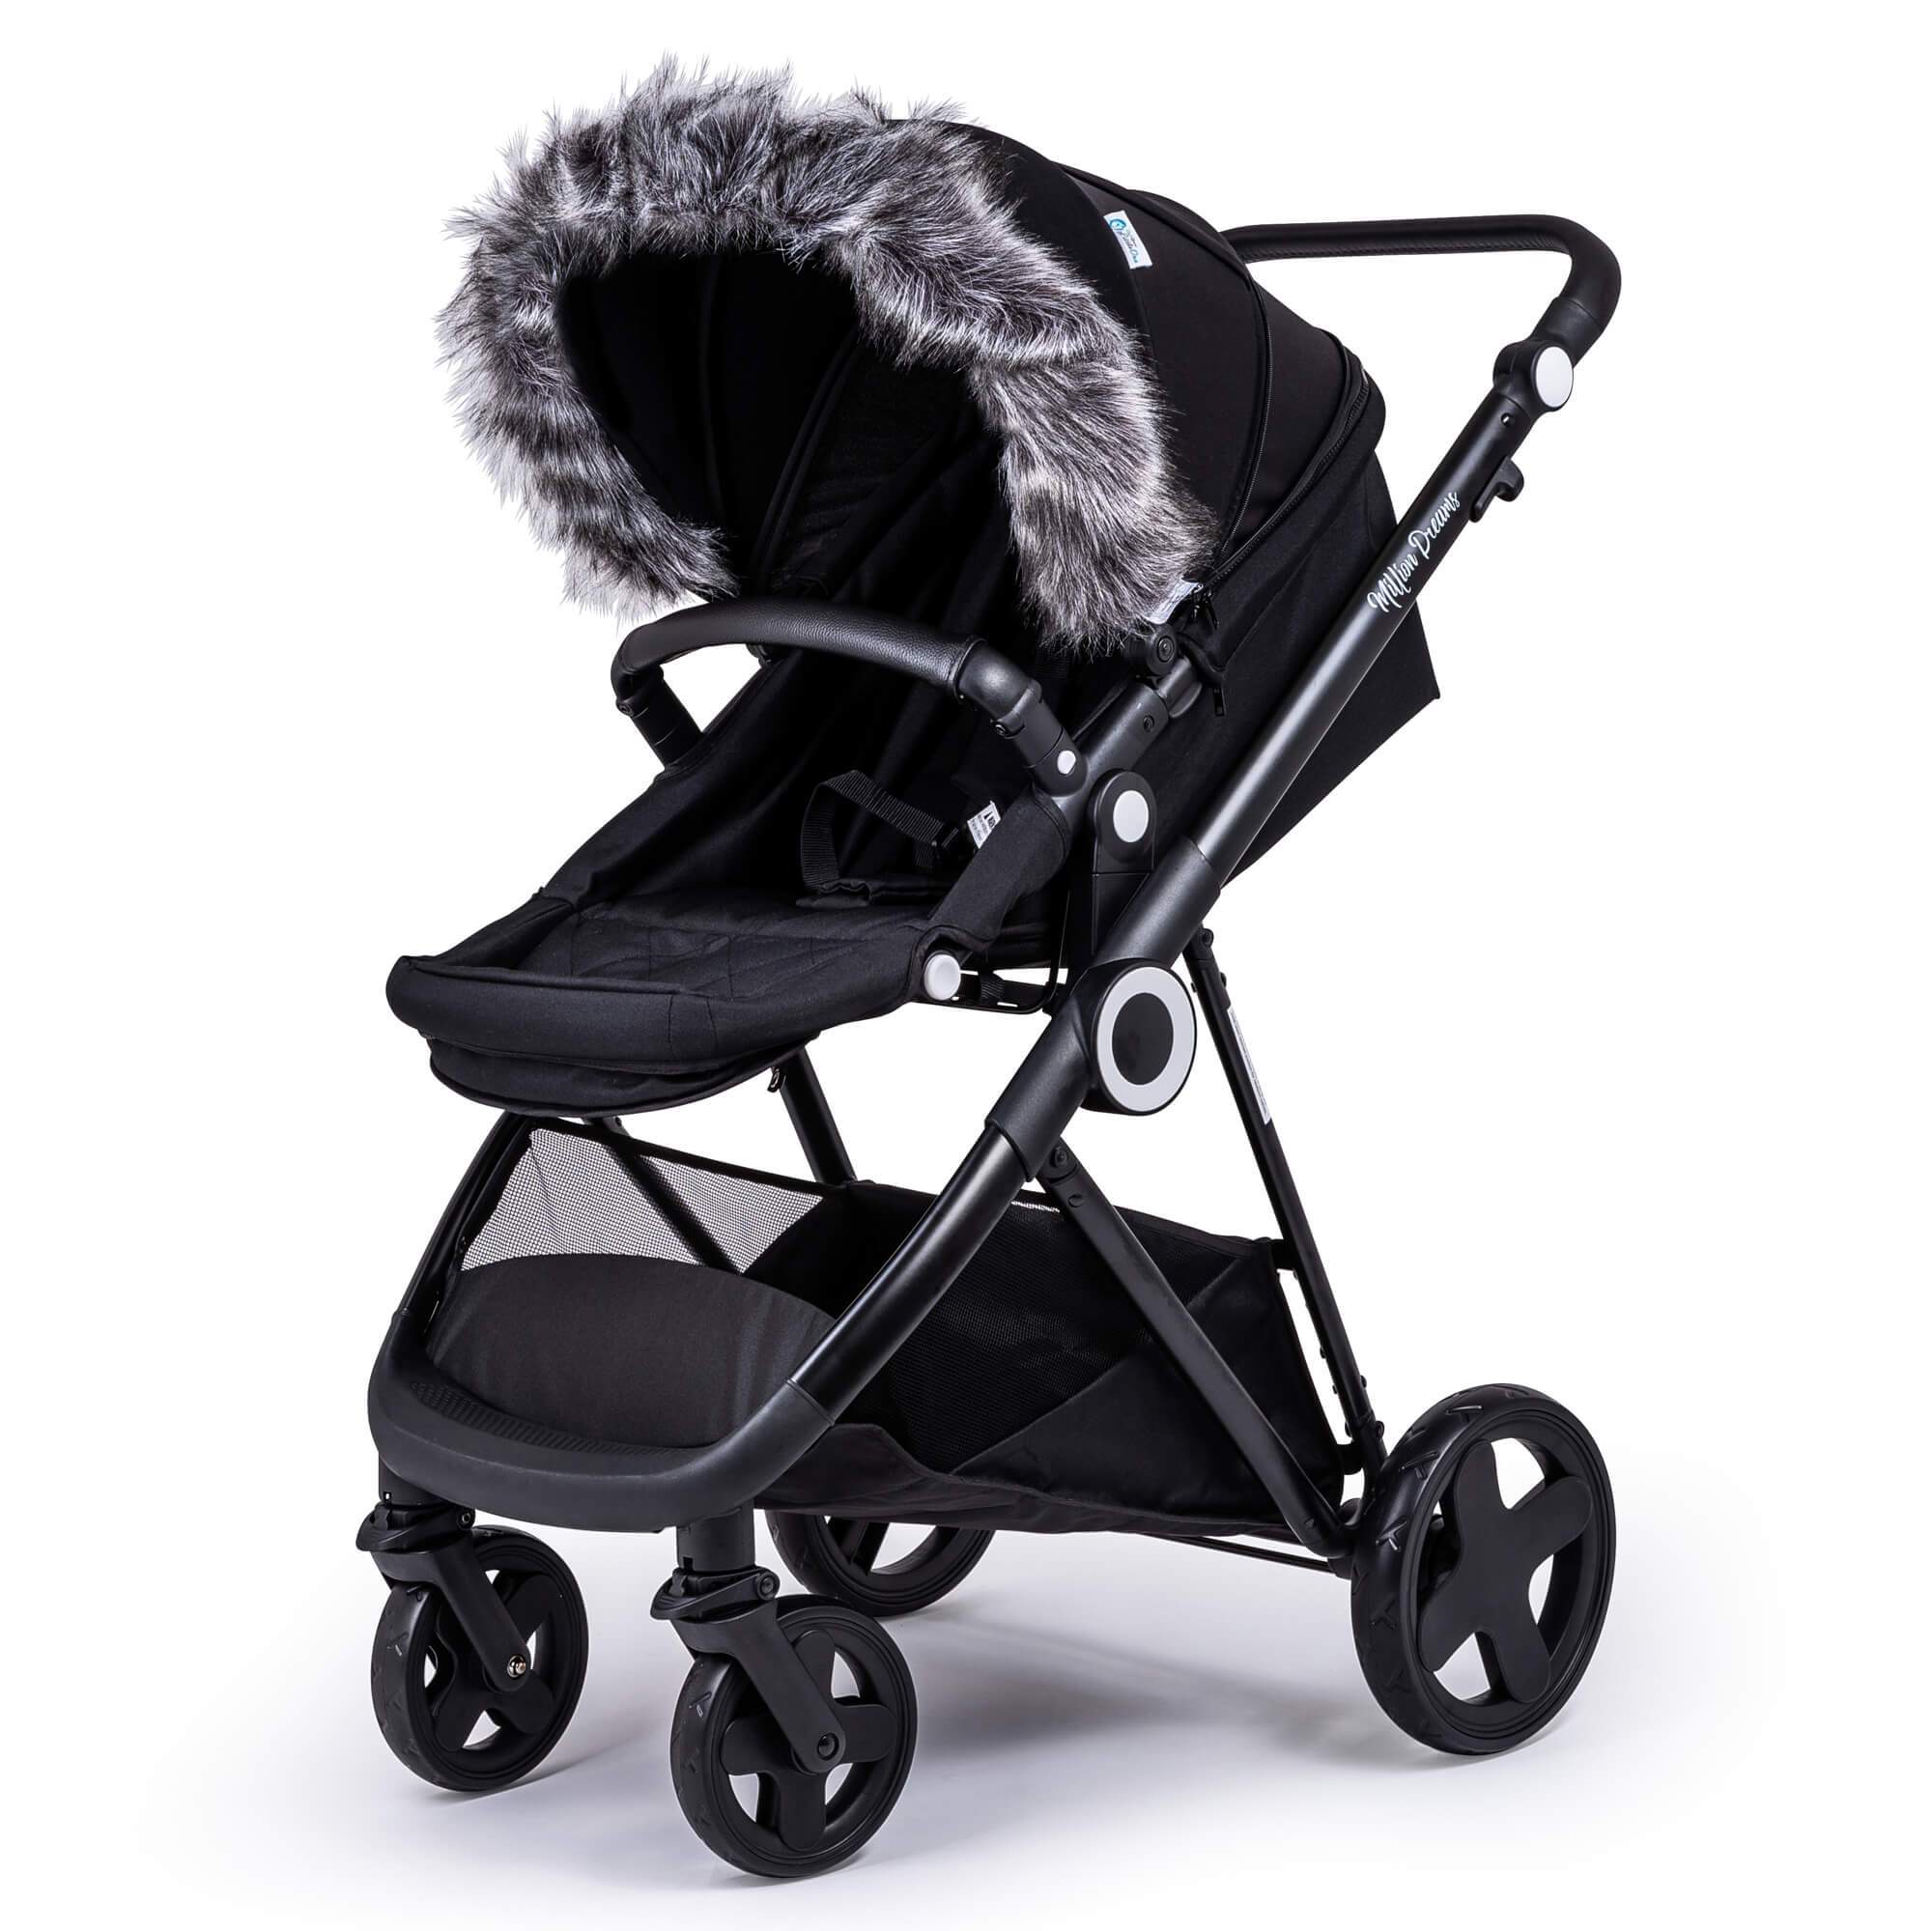 Pram Fur Hood Trim Attachment for Pushchair Compatible with Bumbleride - Dark Grey / Fits All Models | For Your Little One